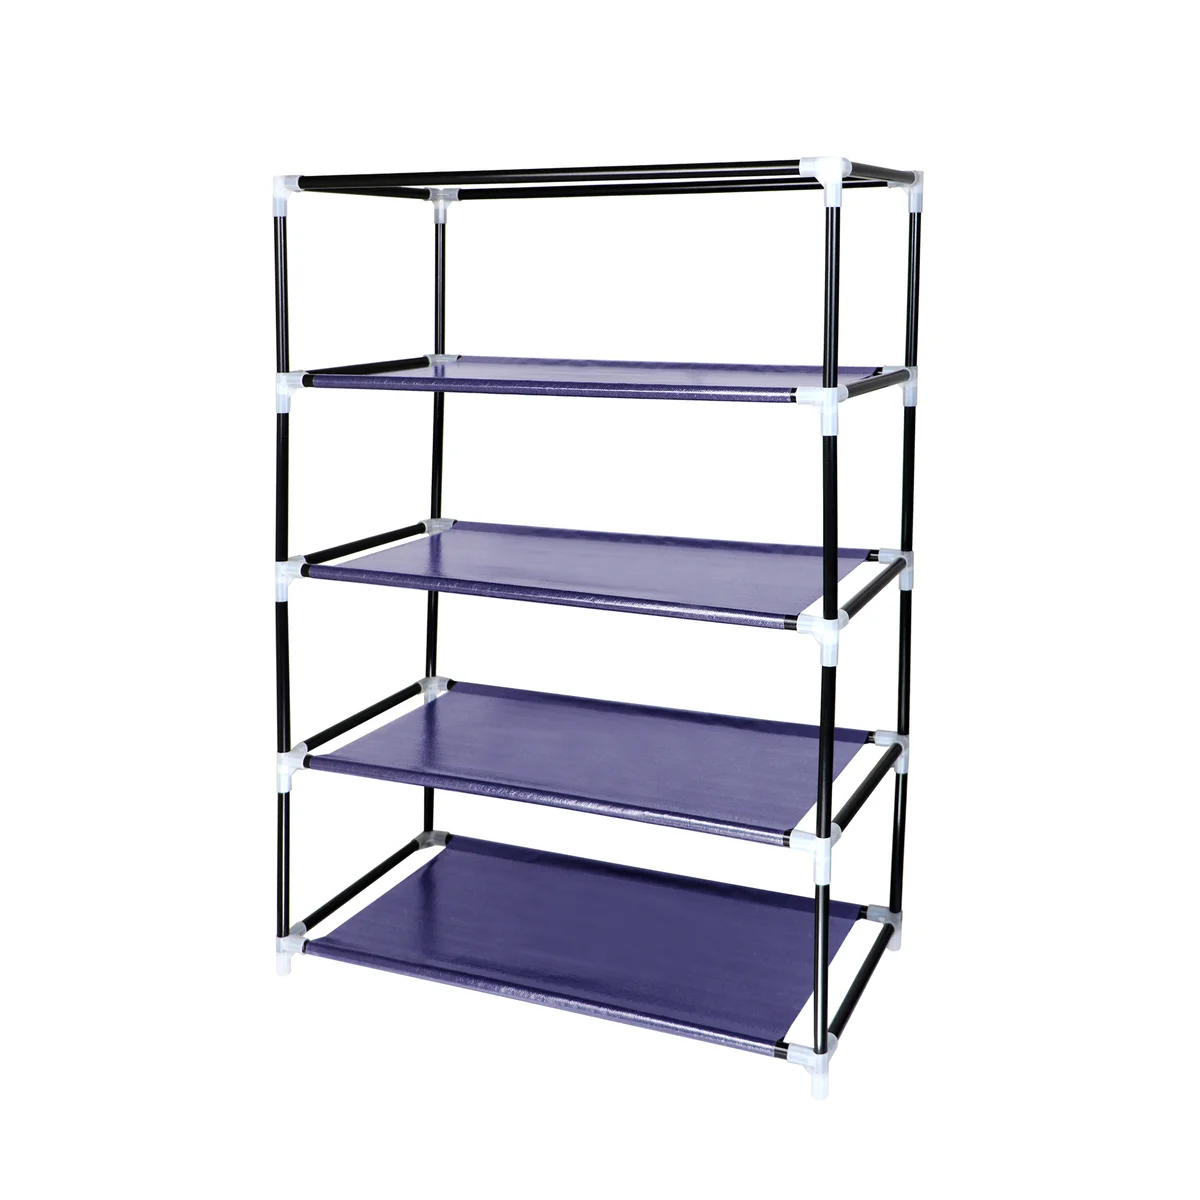 4 Tier Shoe Rack with Side Pocket, Holds 24 Shoes